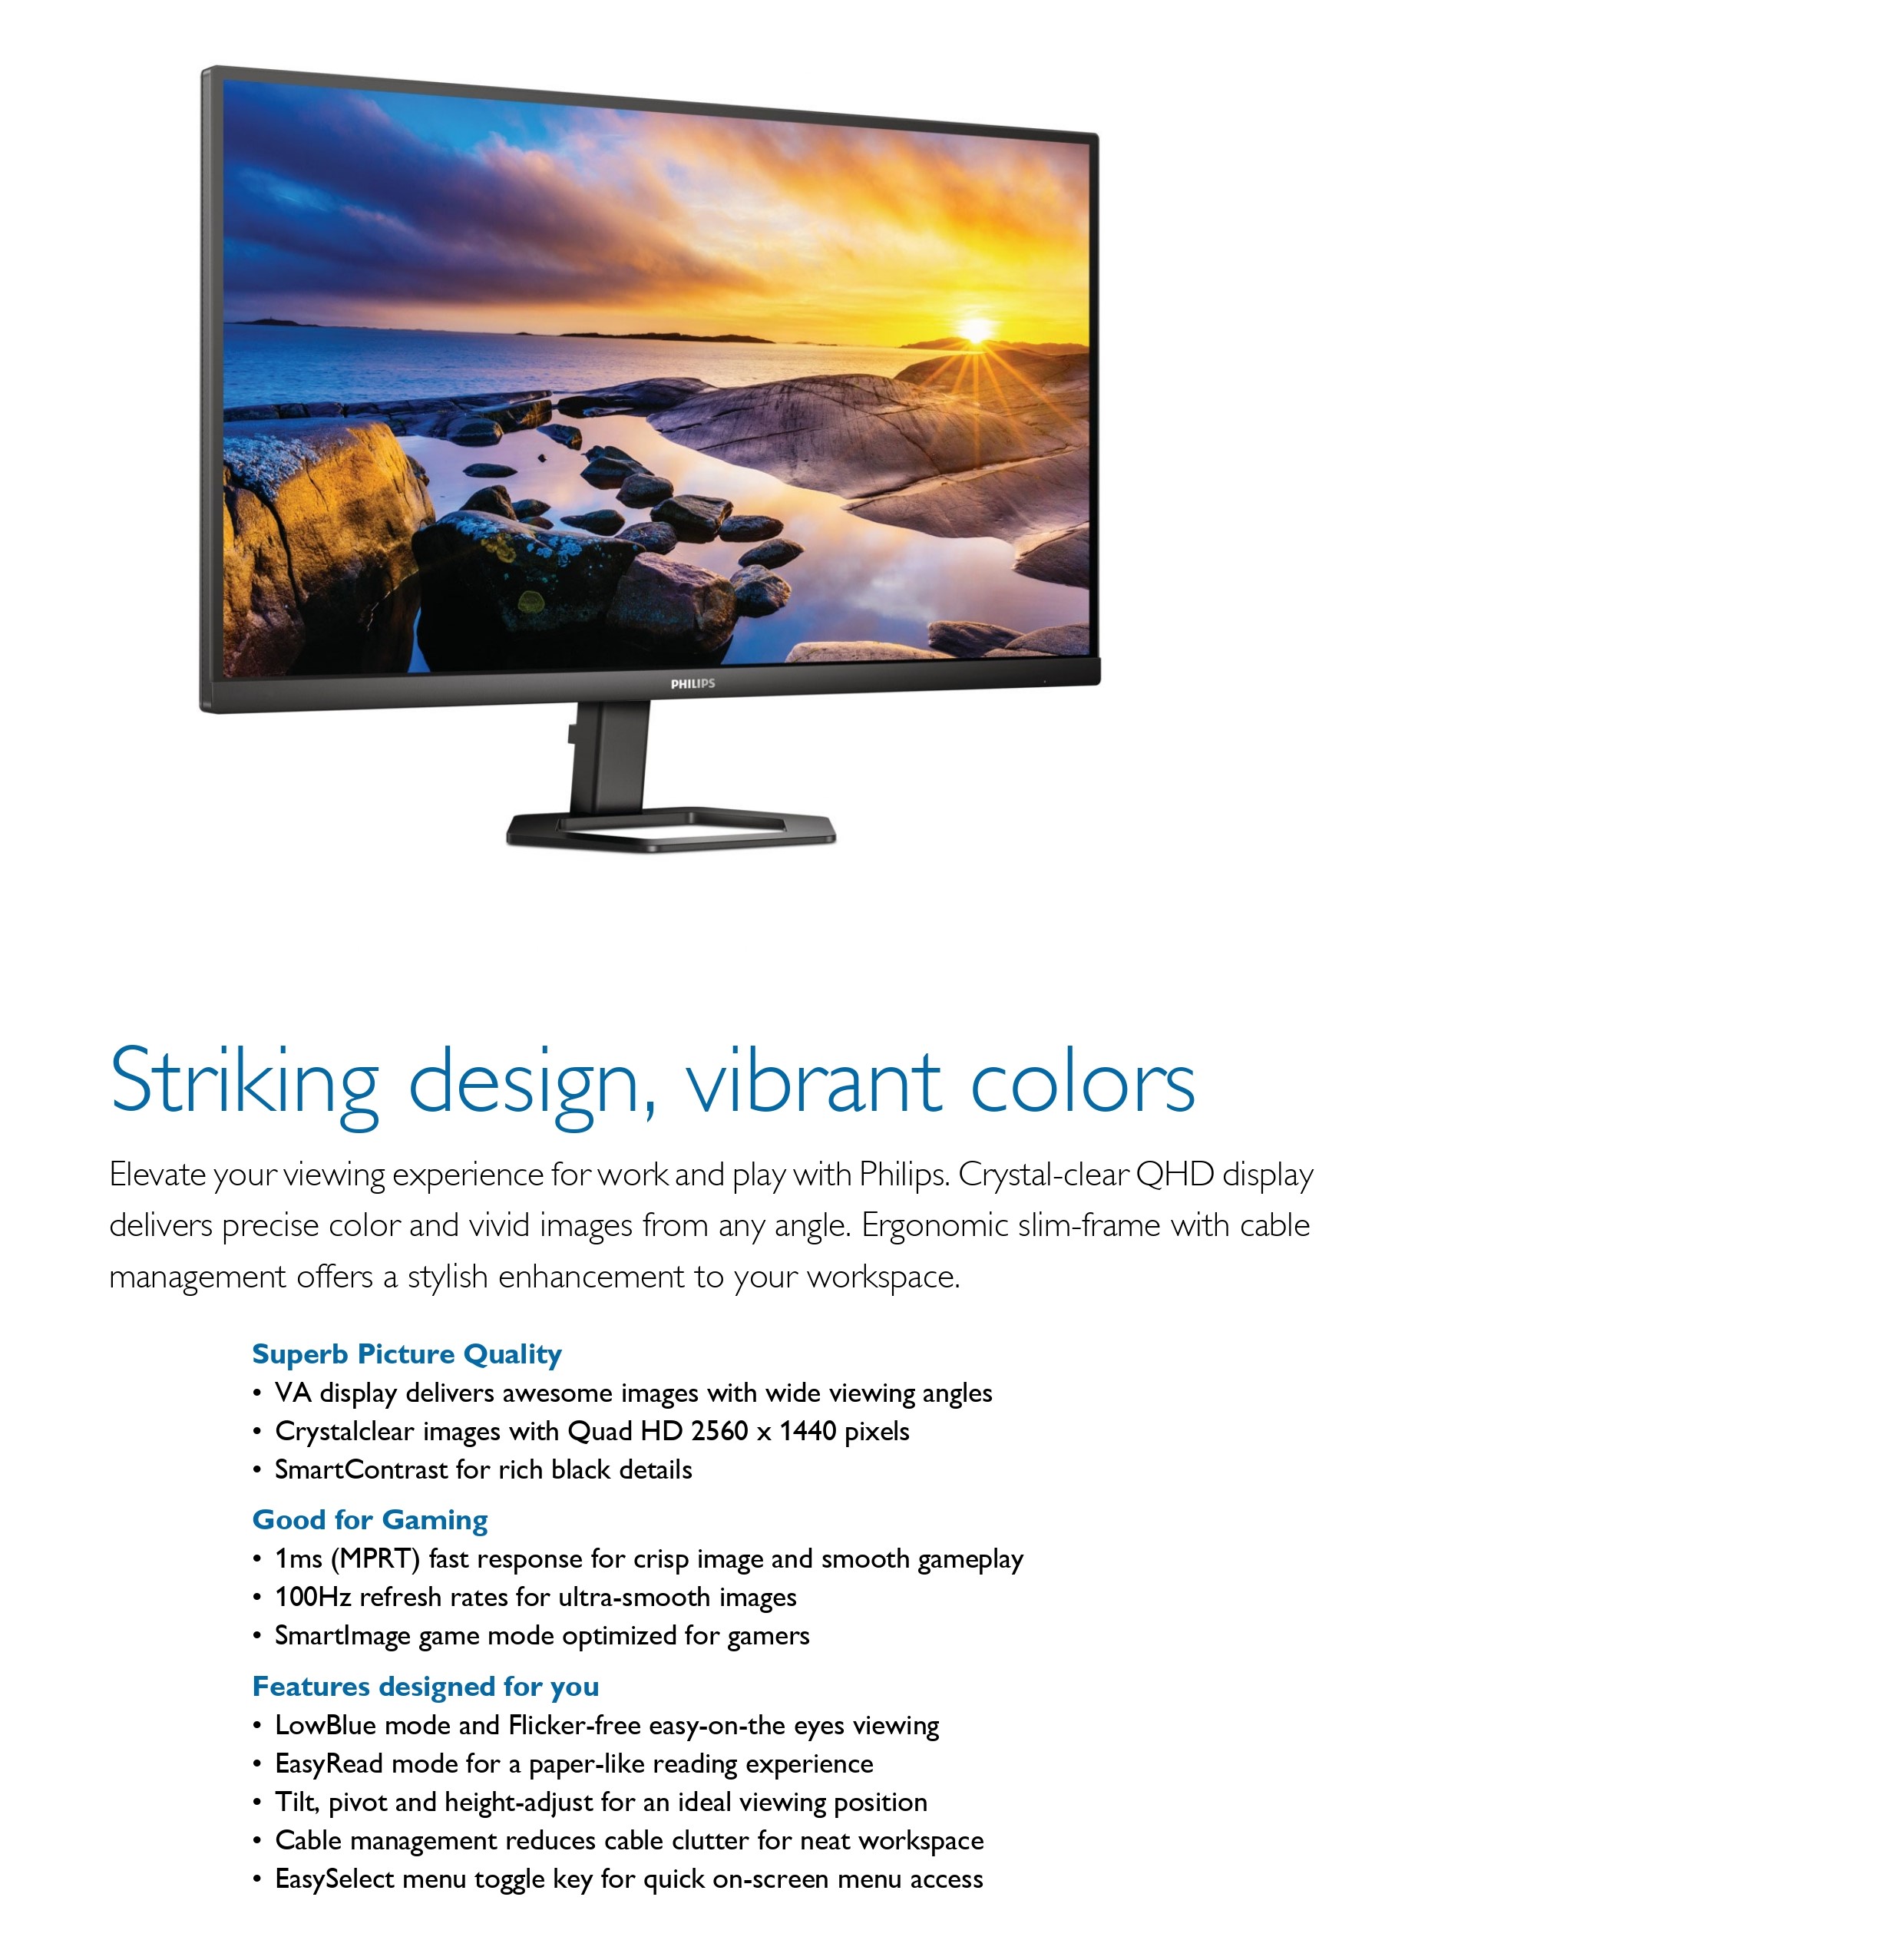 A large marketing image providing additional information about the product Philips 27E1N5500LB - 27" QHD 100Hz VA Monitor - Additional alt info not provided